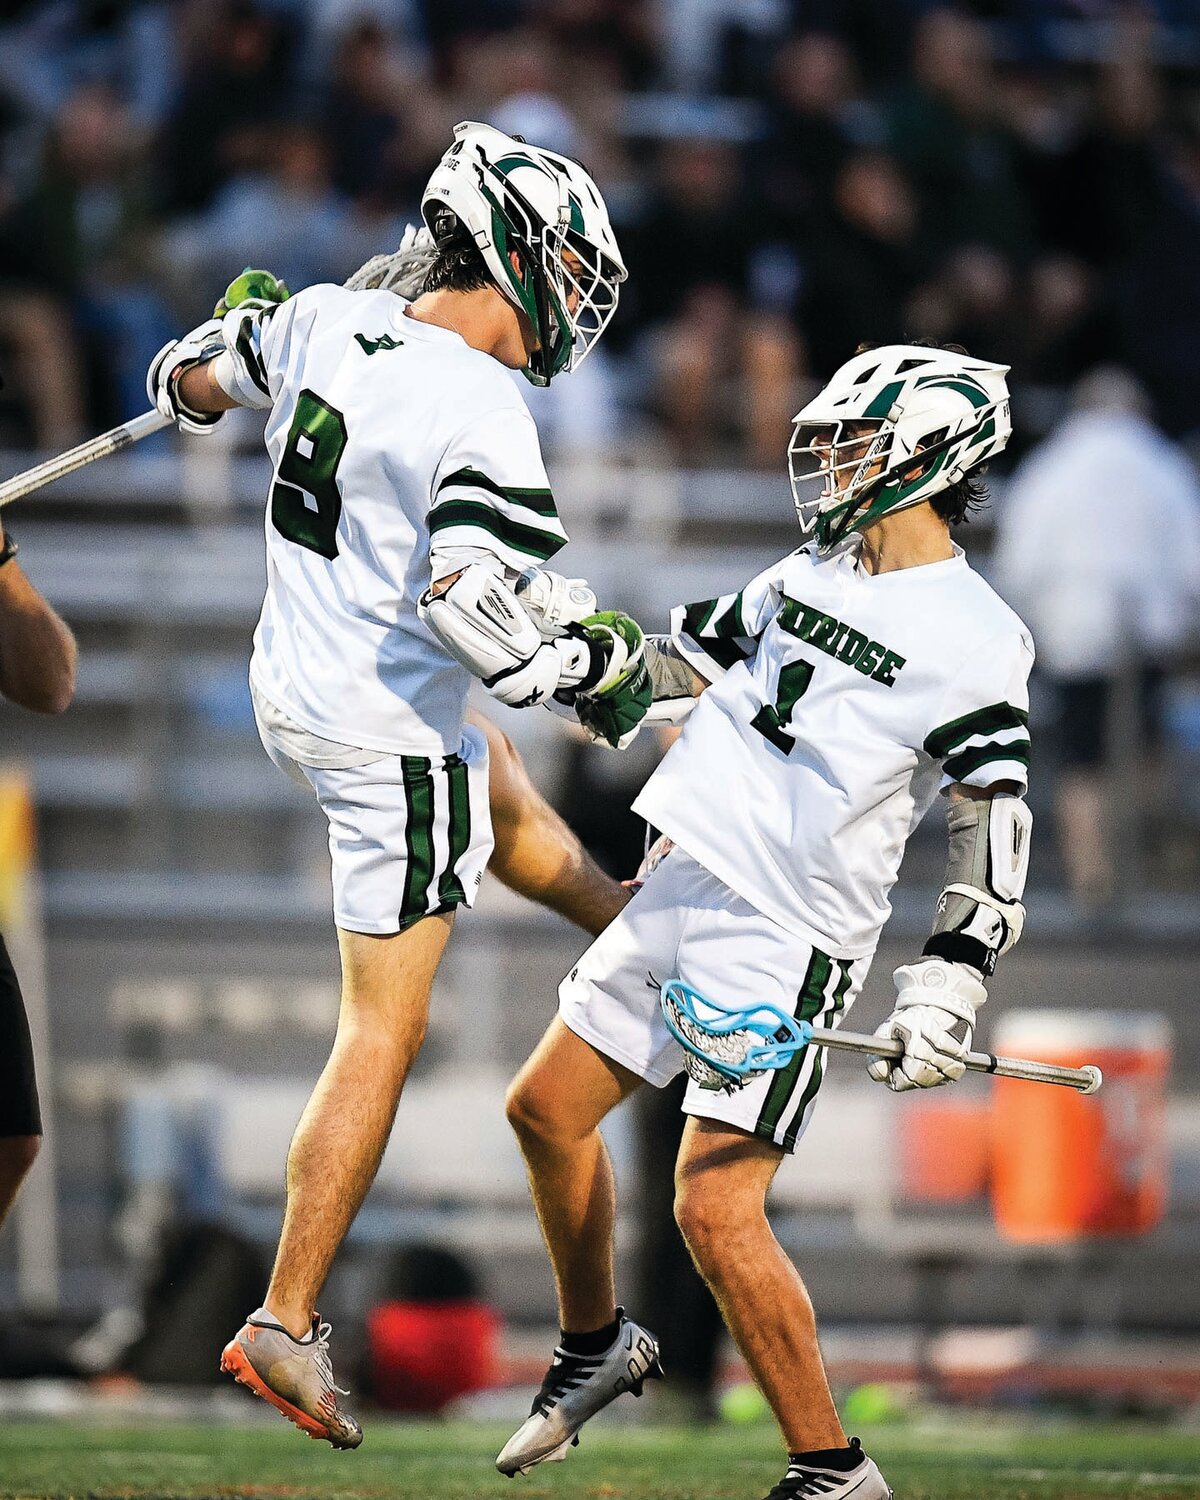 Pennridge’s Ryan Carickhoff and Levi Souder celebrate a goal, which tied the game at 9.